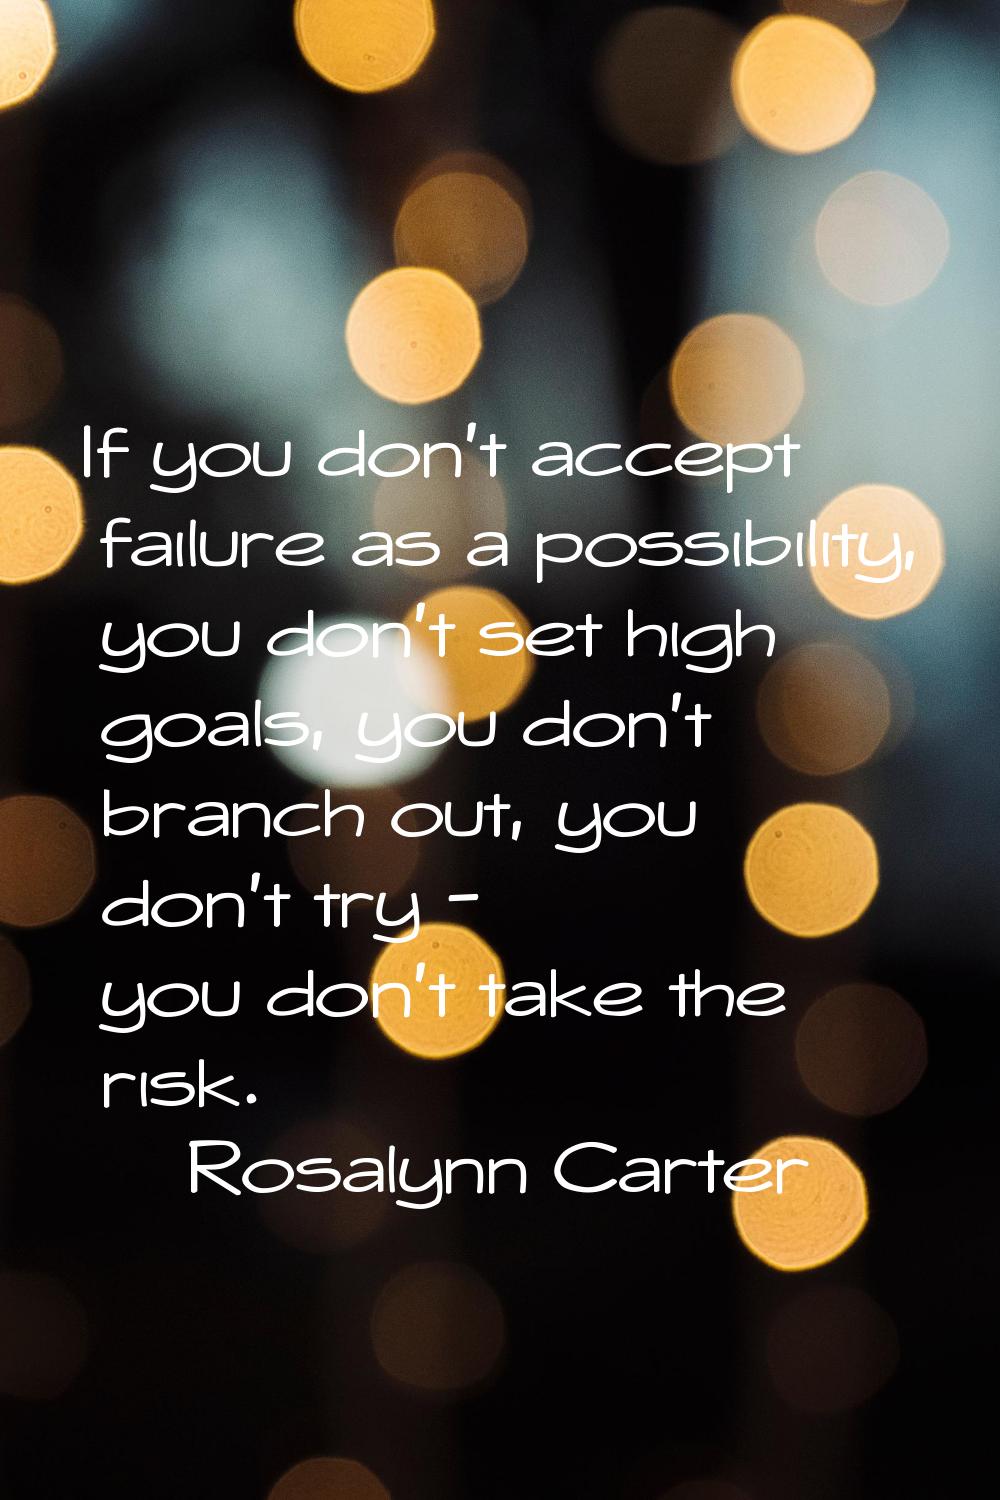 If you don't accept failure as a possibility, you don't set high goals, you don't branch out, you d